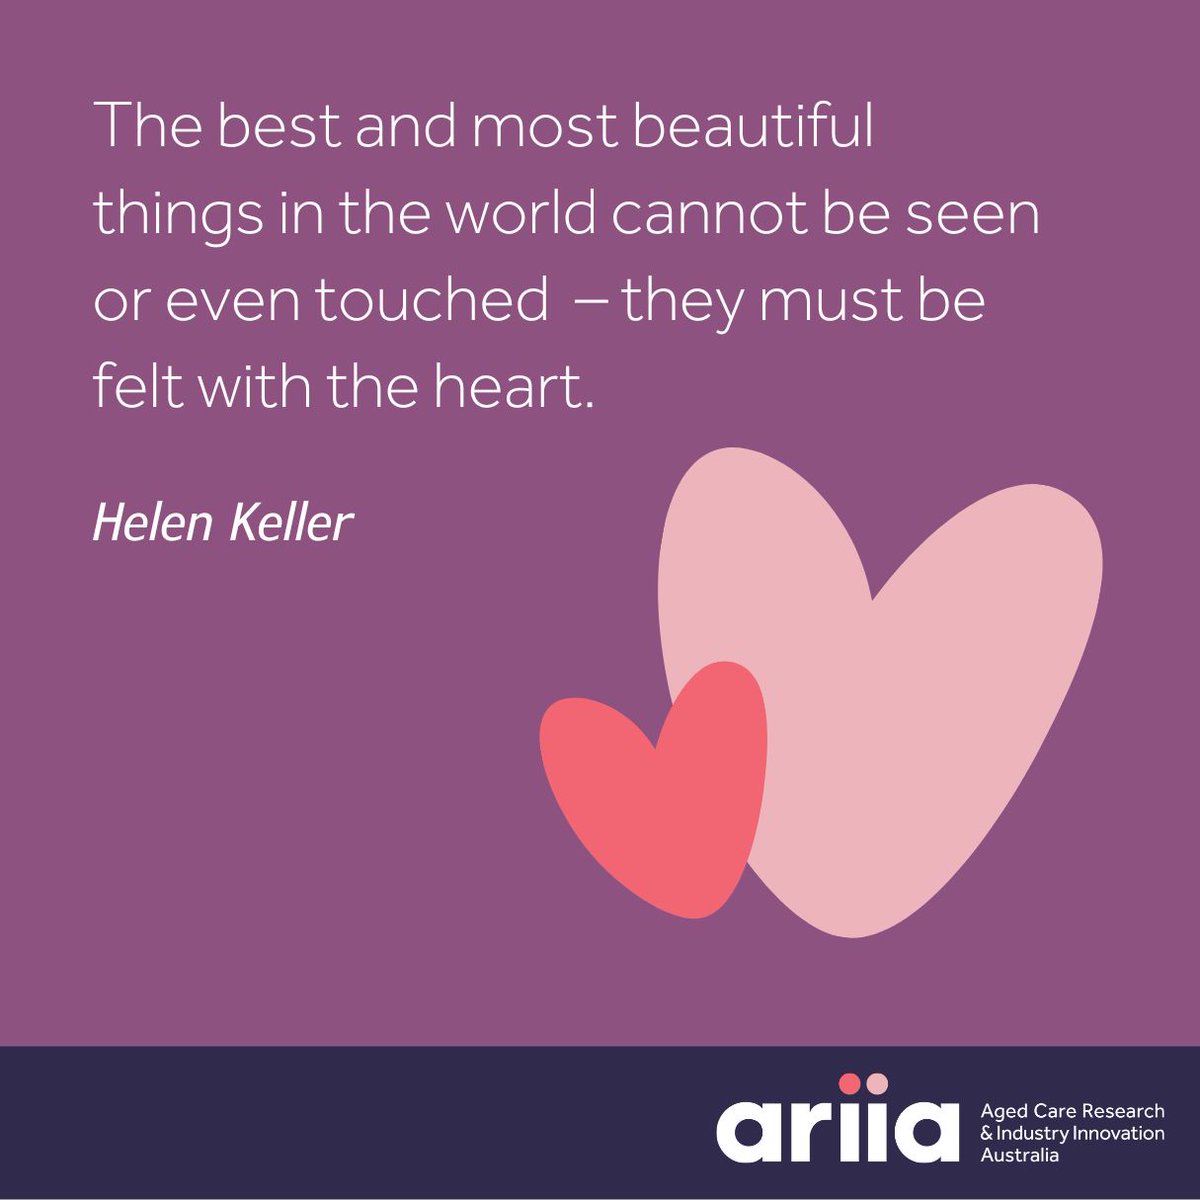 #ThoughtforThursday - The best and most beautiful things in the world cannot be seen or even touched — they must be felt with the heart. - Helen Keller